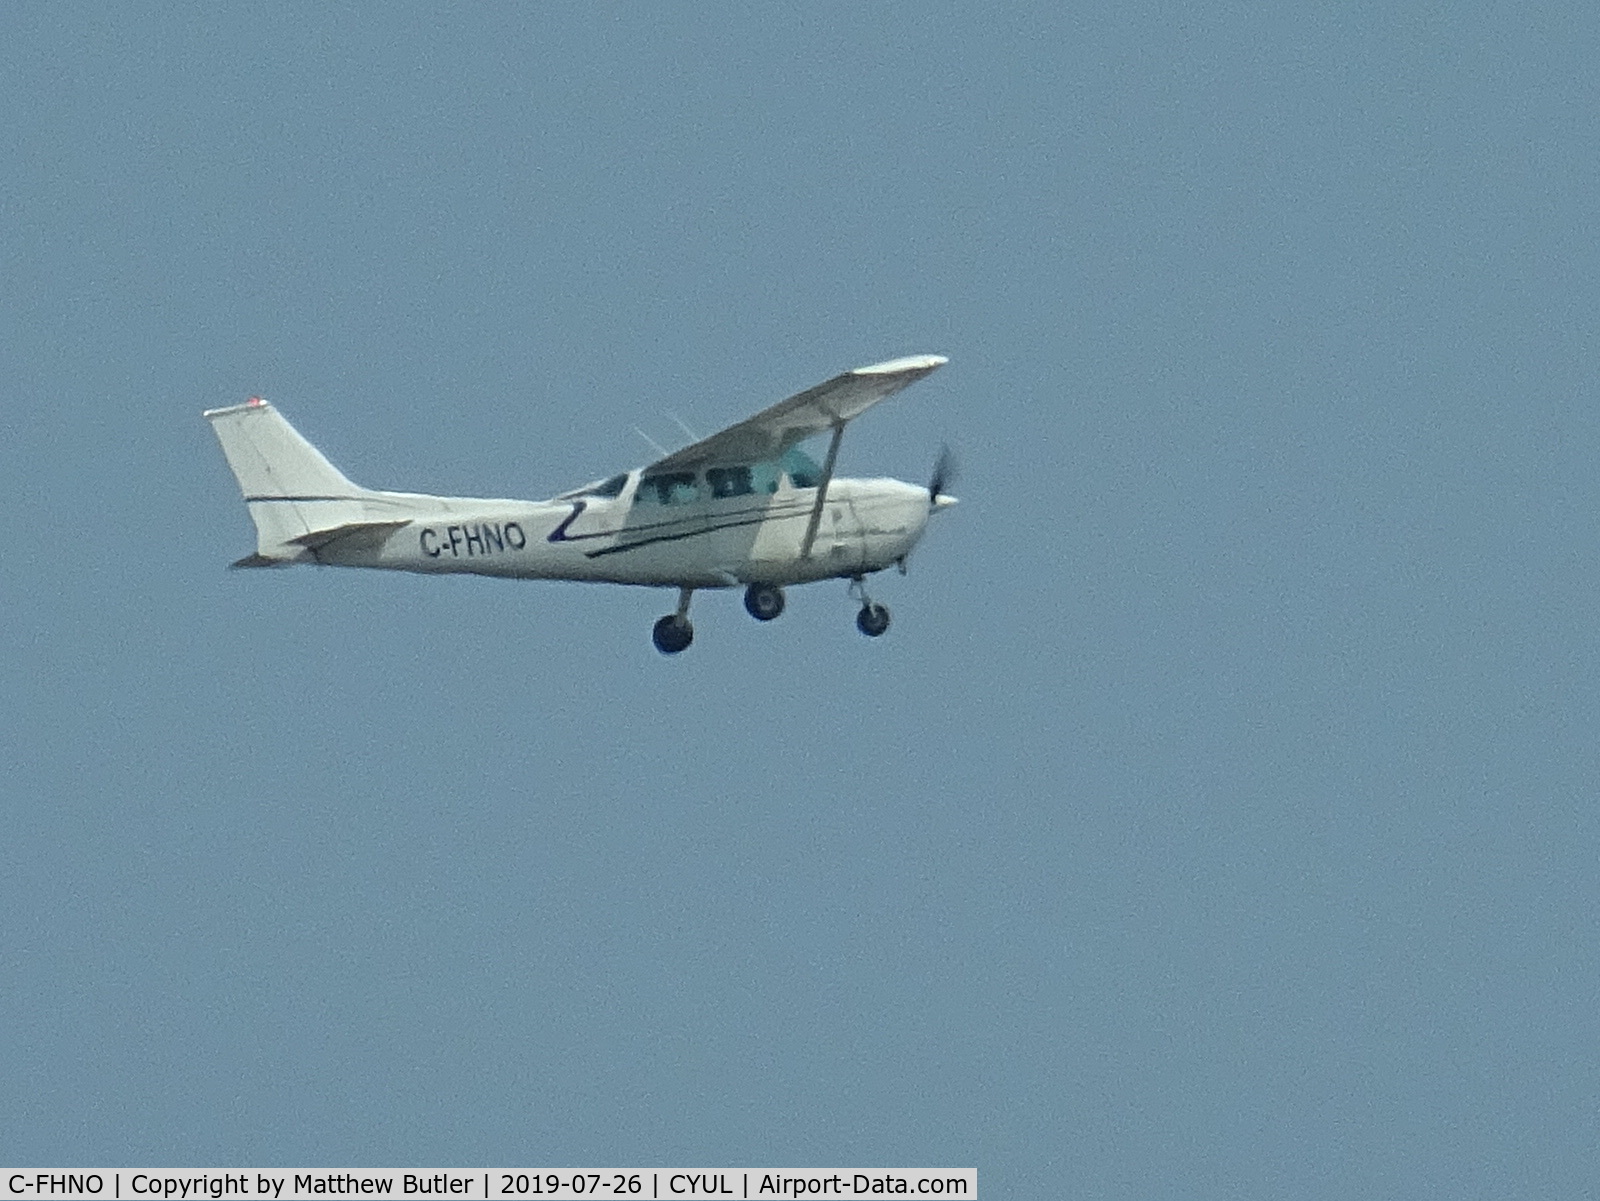 C-FHNO, 1972 Cessna 172L C/N 17260163, Taking off from CYUL